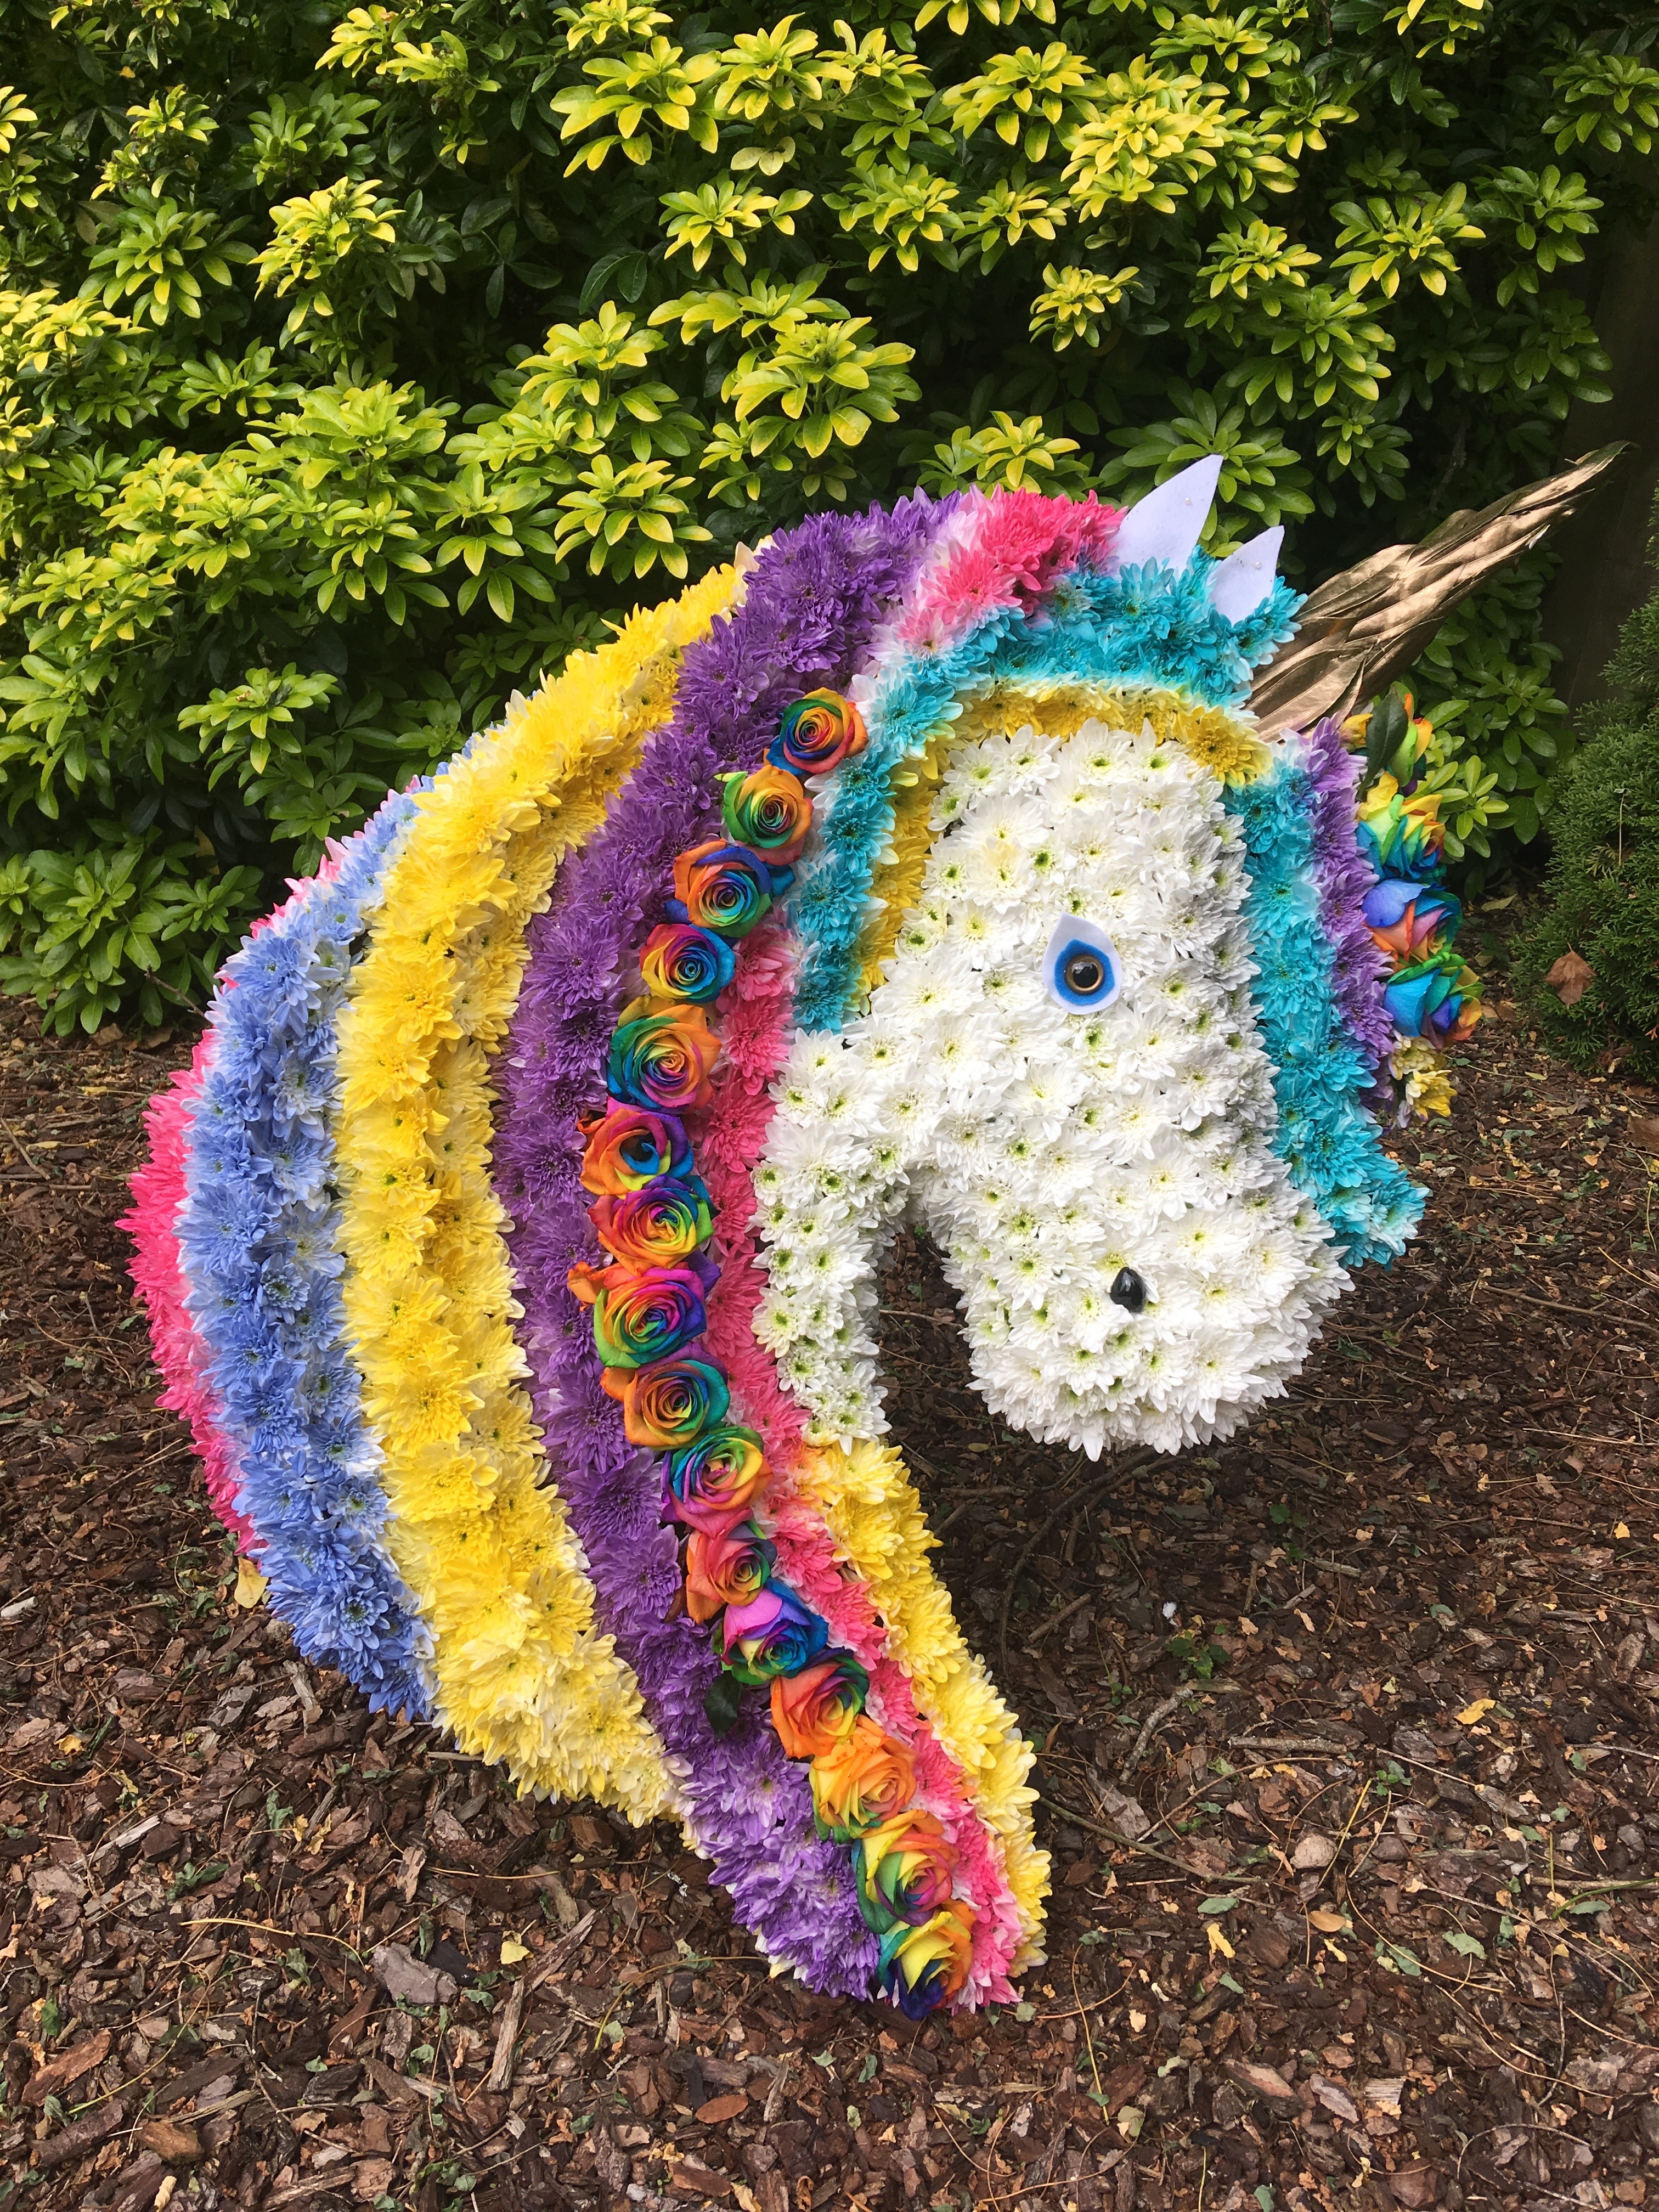 Unicorn made from flowers